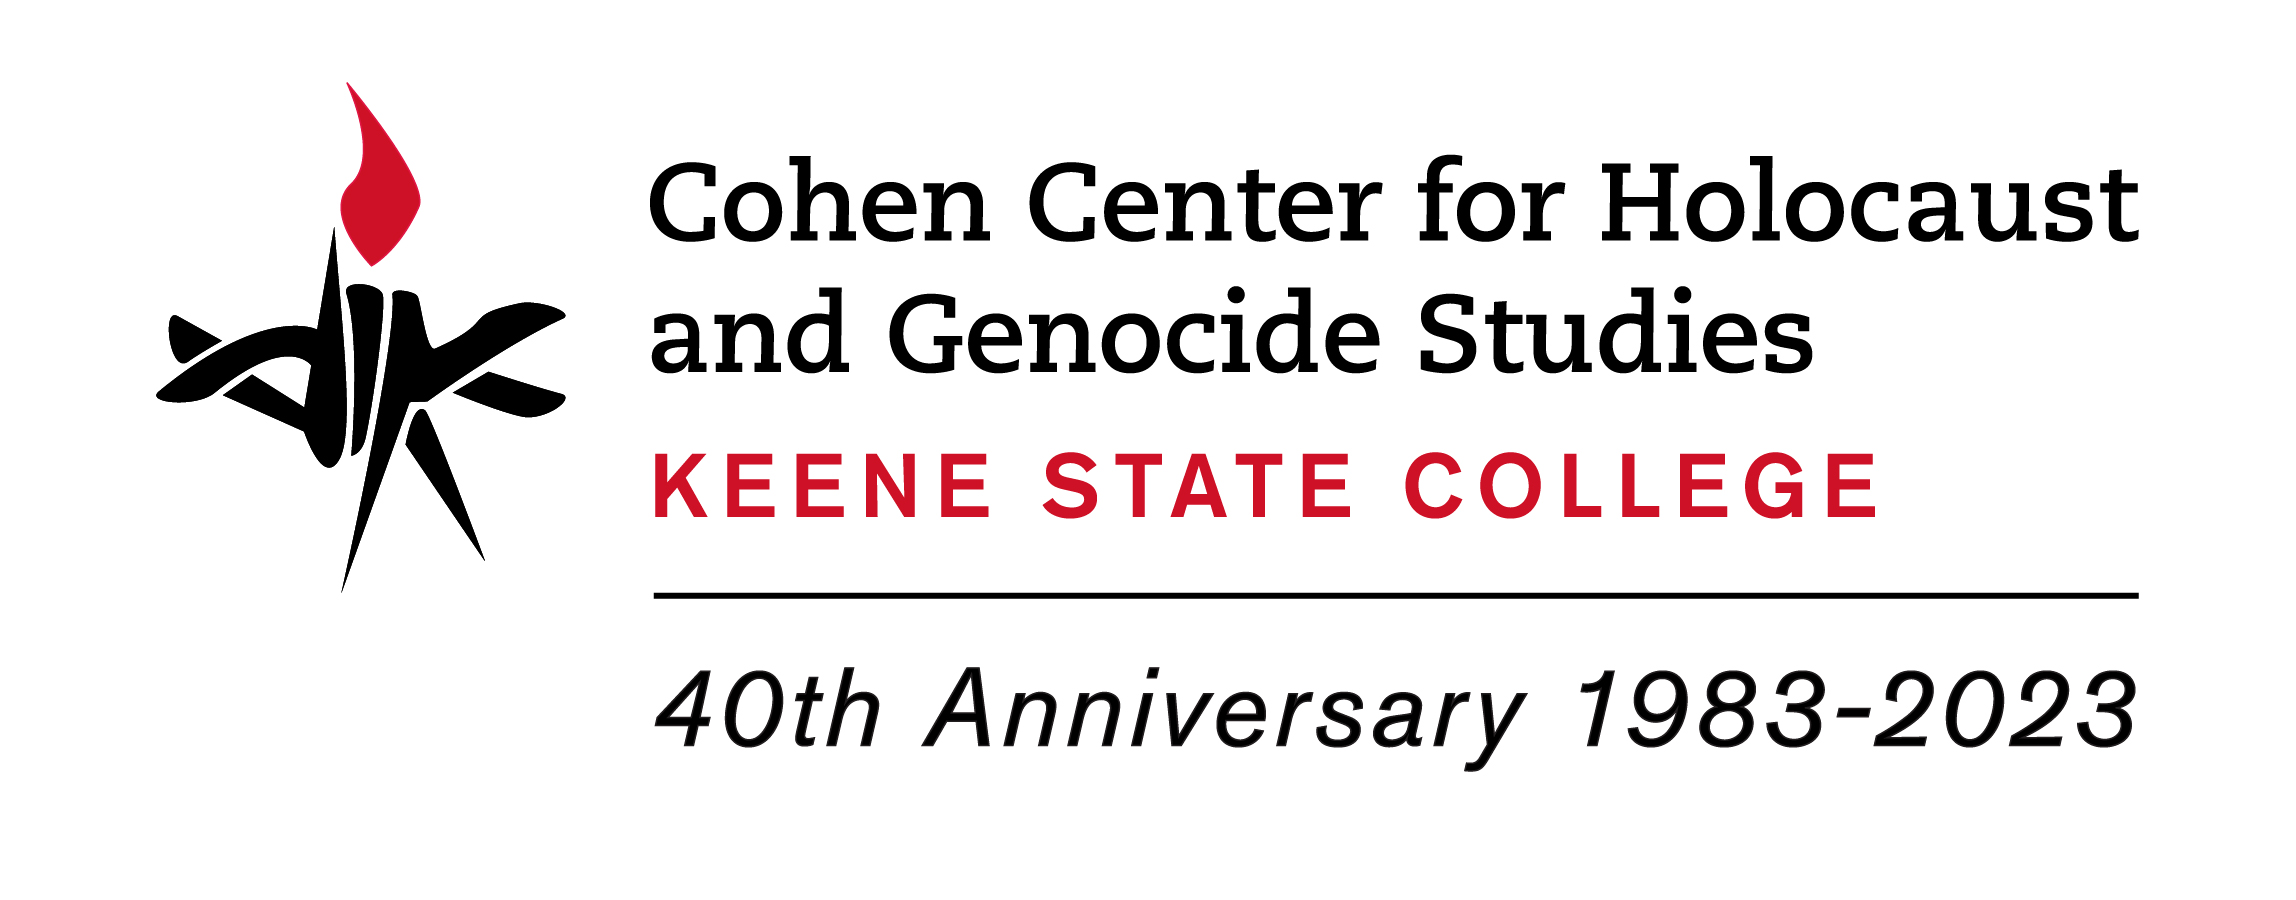 Cohen Center for Holocaust and Genocide Studies